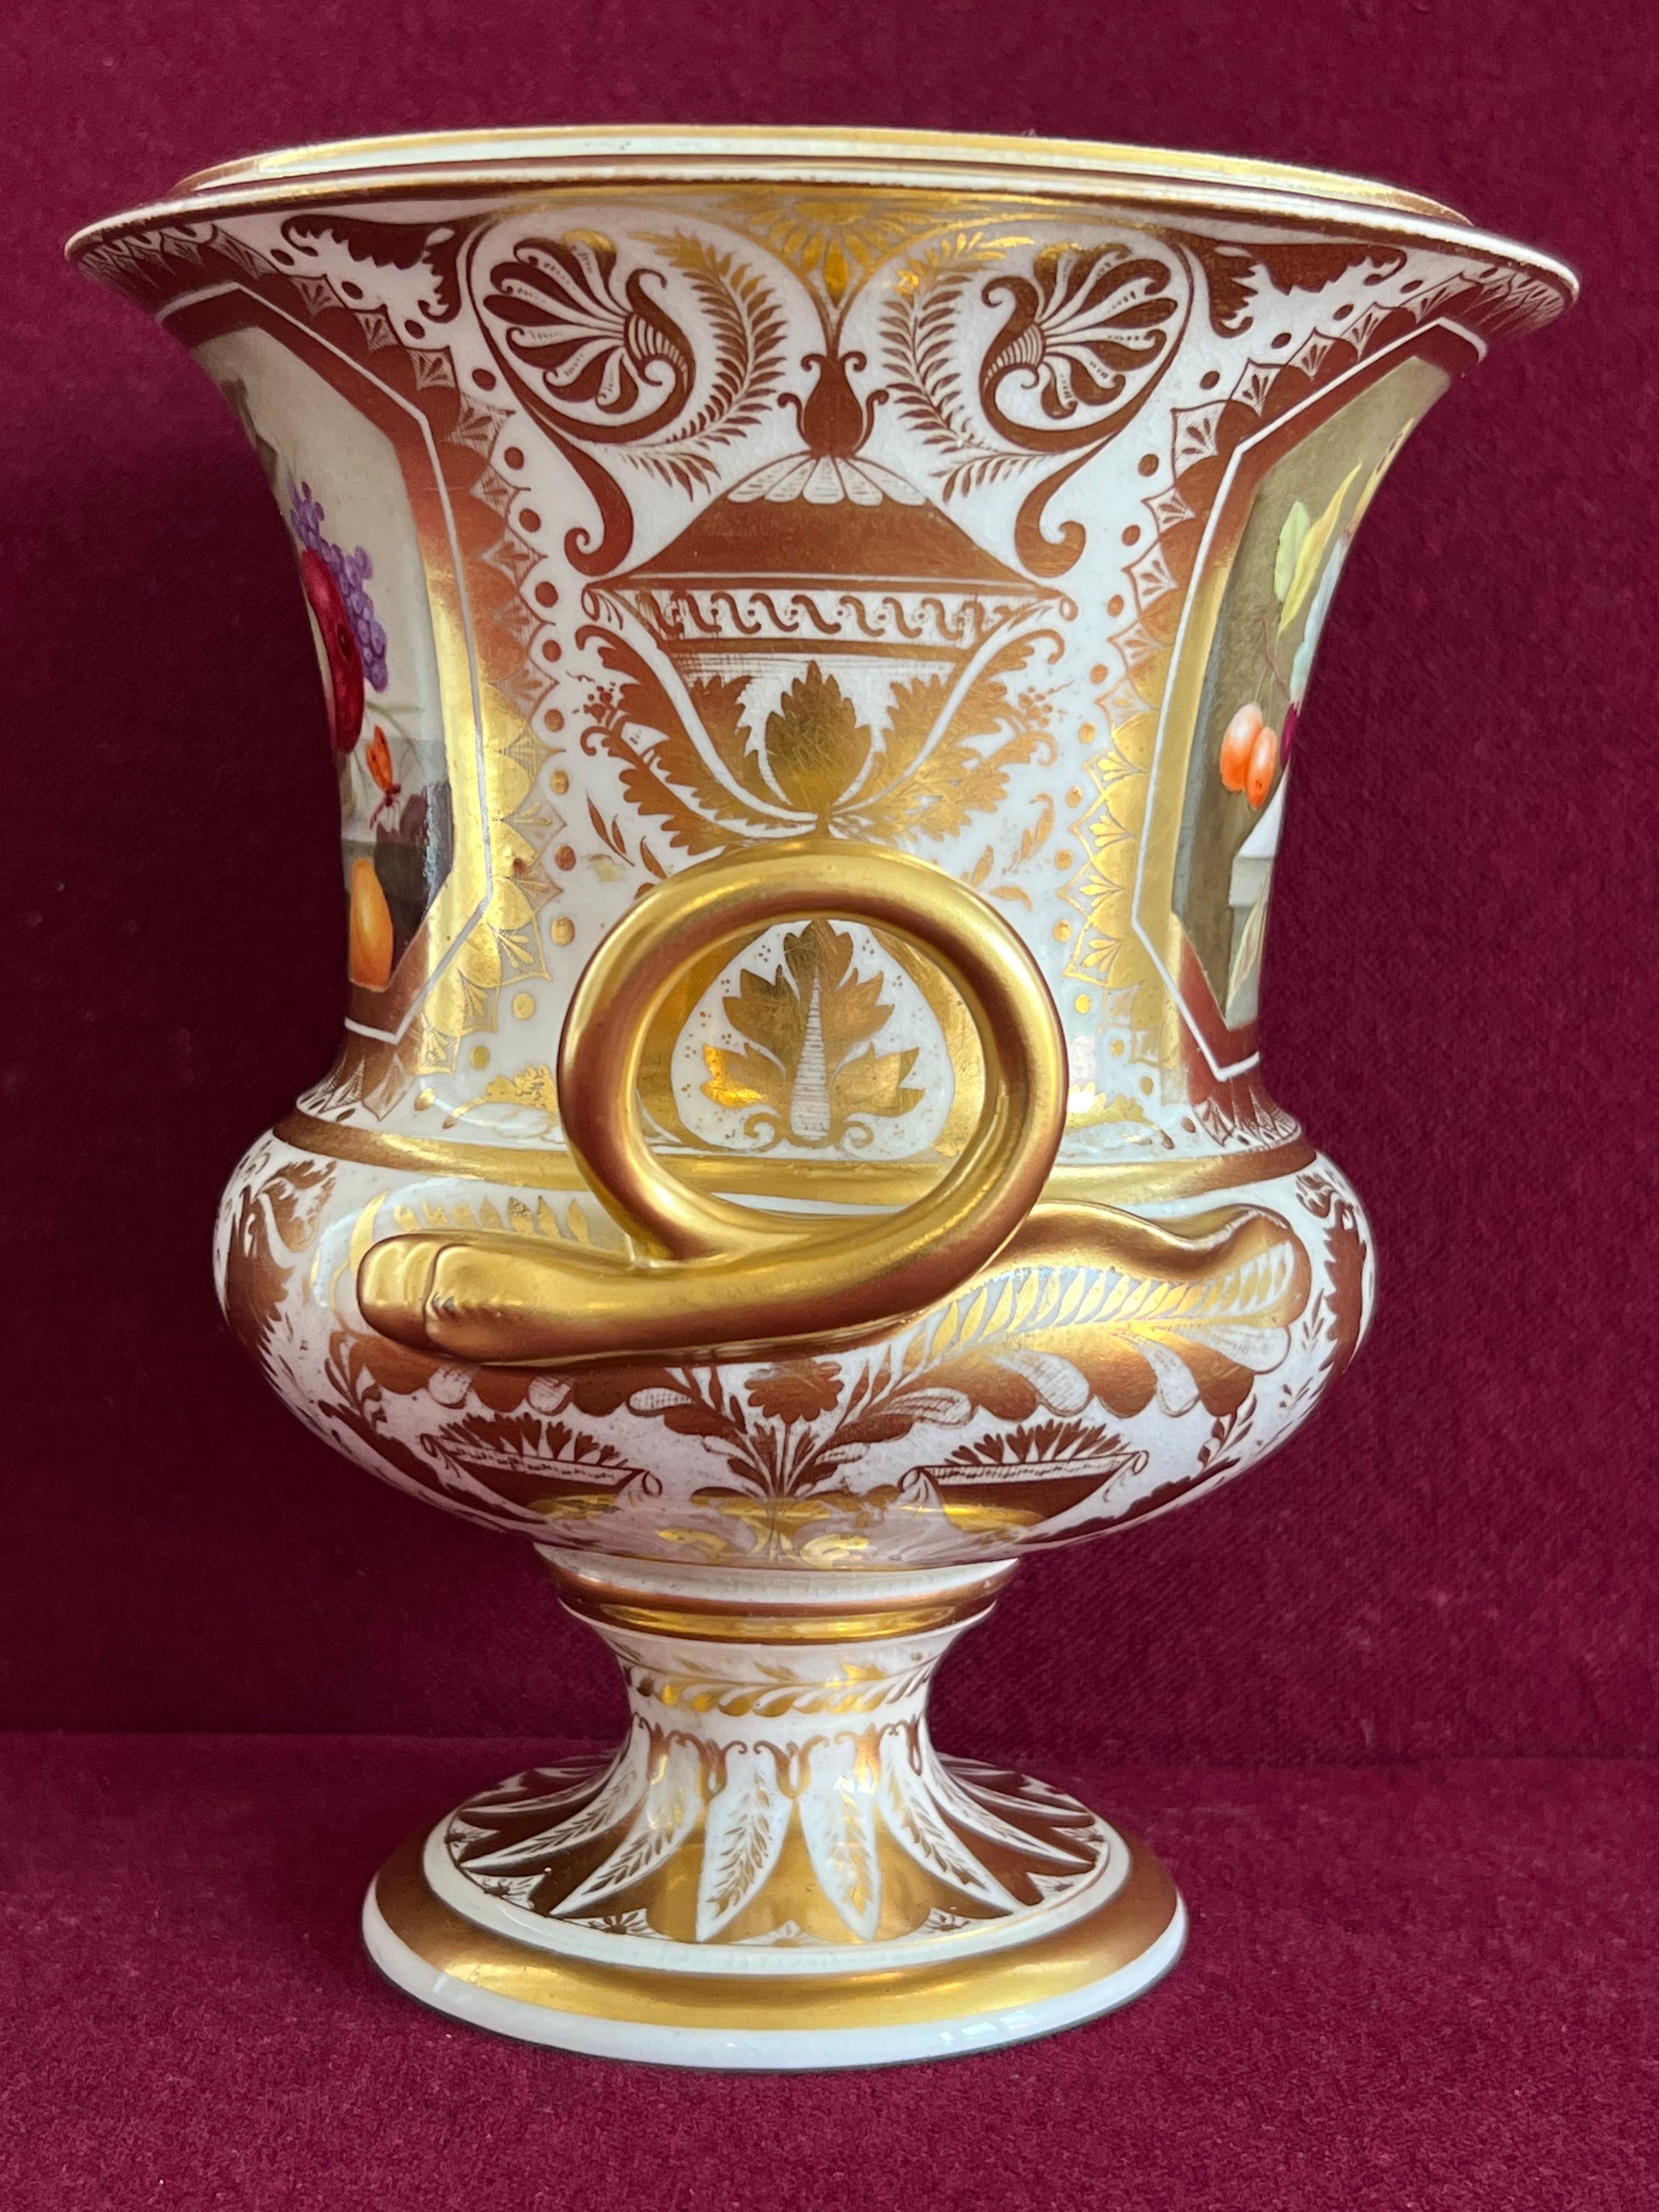 English Fine Derby Porcelain Vase C.1815 Decorated in the Manner of Thomas Steele For Sale